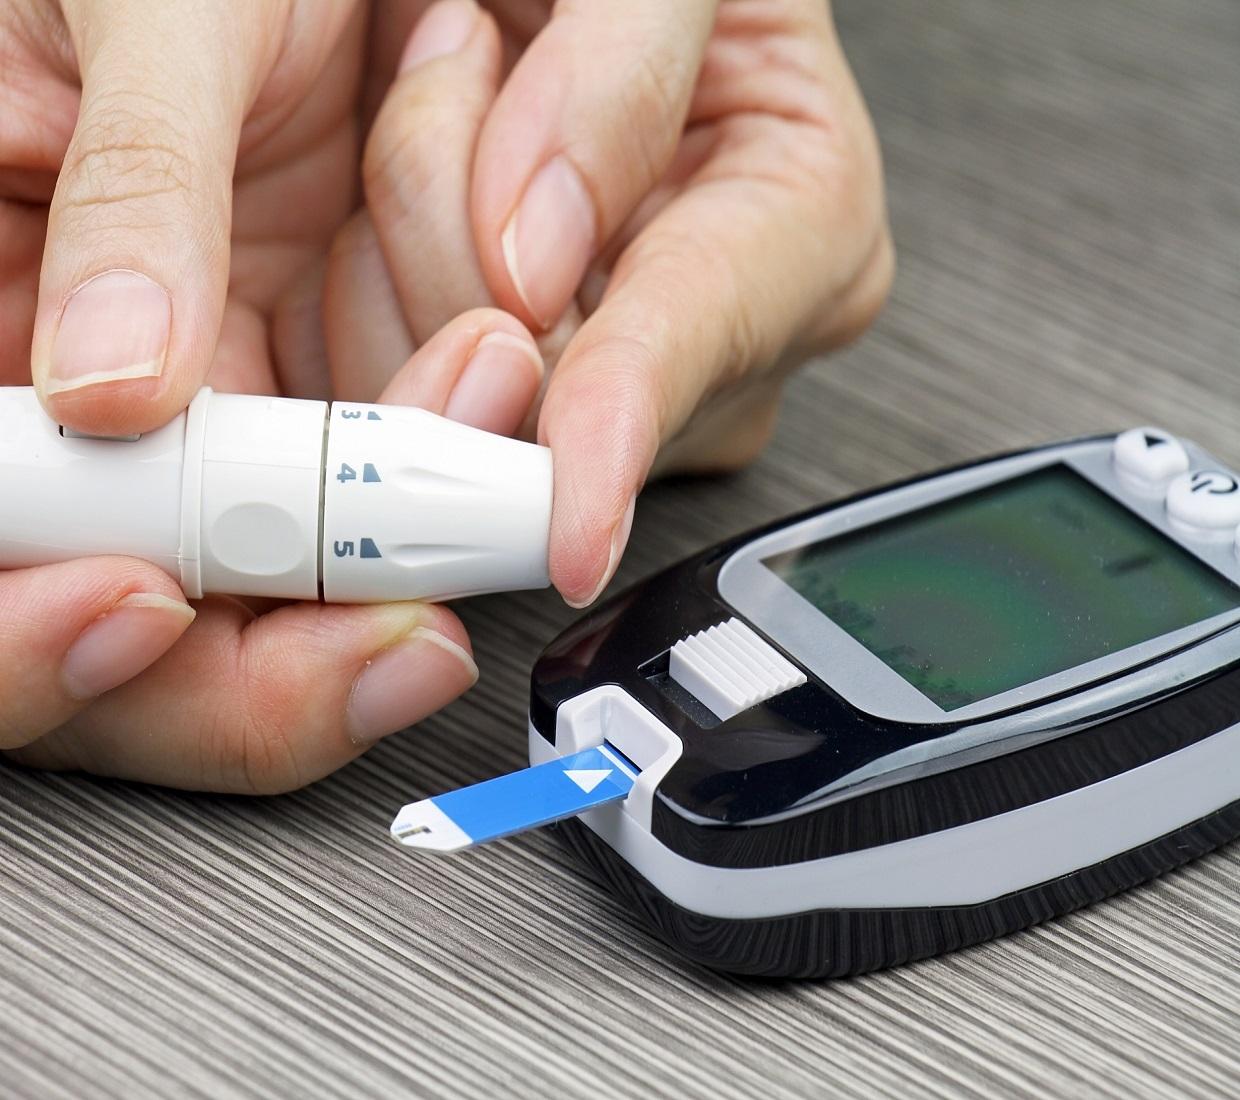 The Big Picture: Checking your Blood Glucose